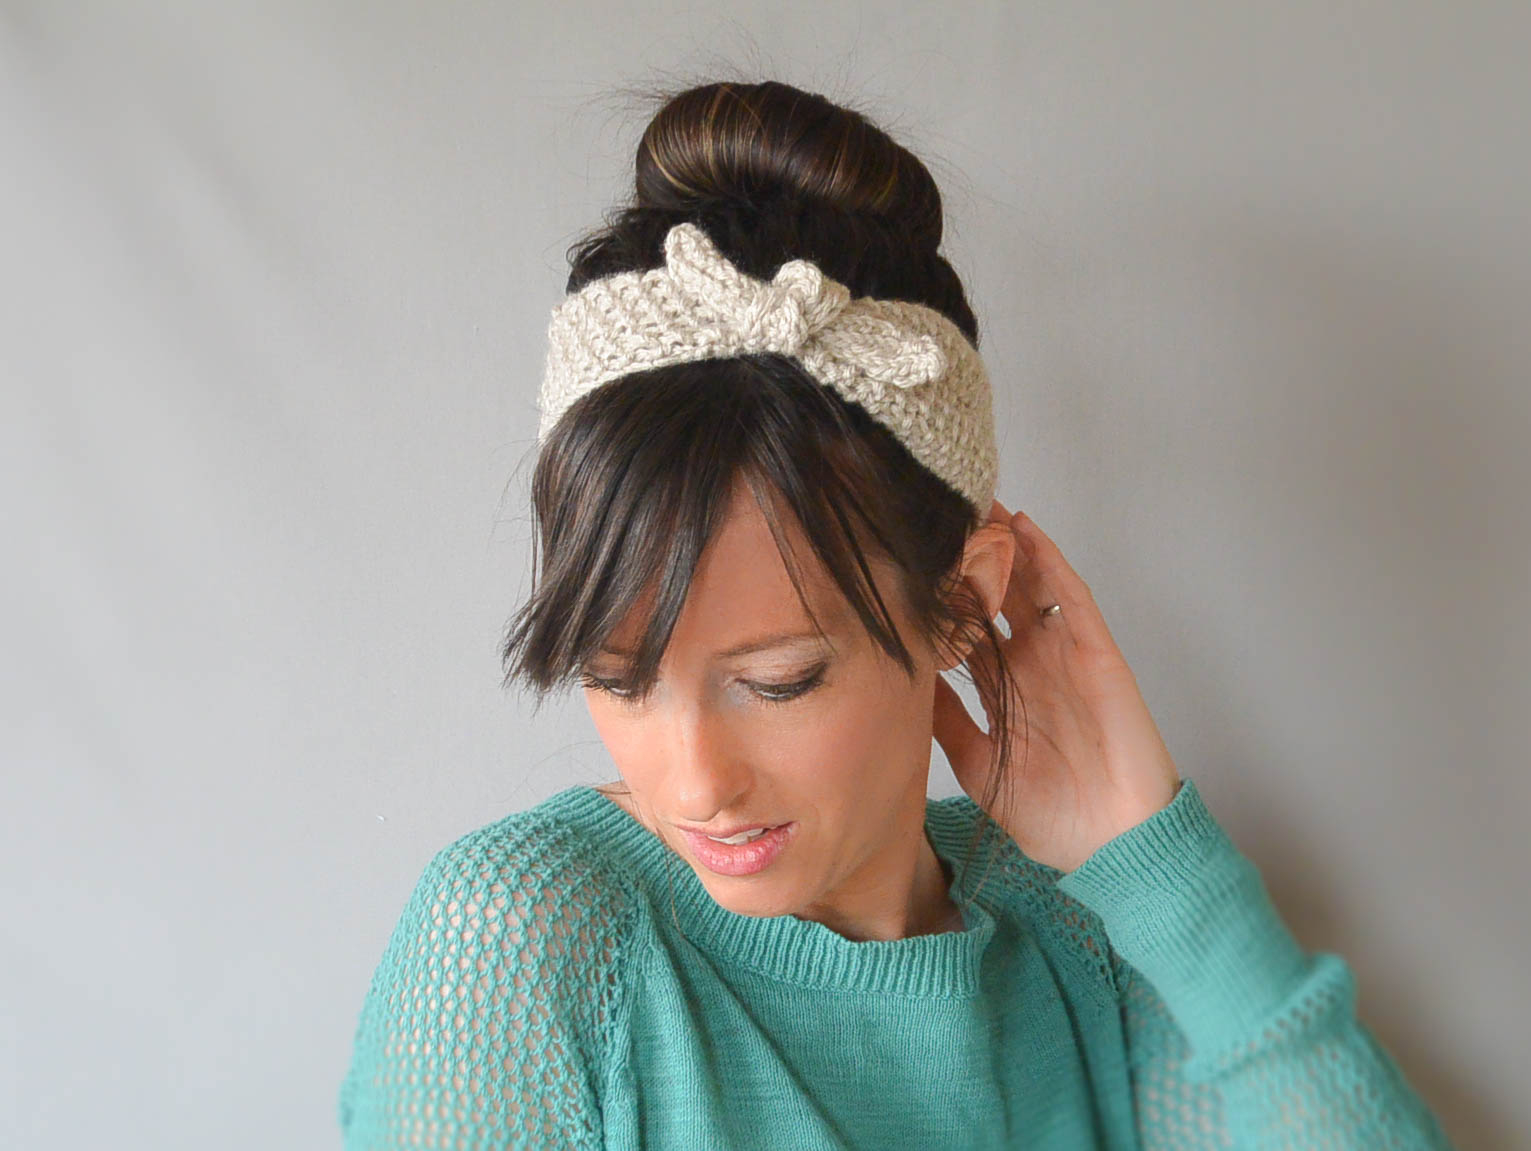 Knitted Headband Patterns With Flower Knit Headband To Style Your Hair Crochet And Knitting Patterns 2019